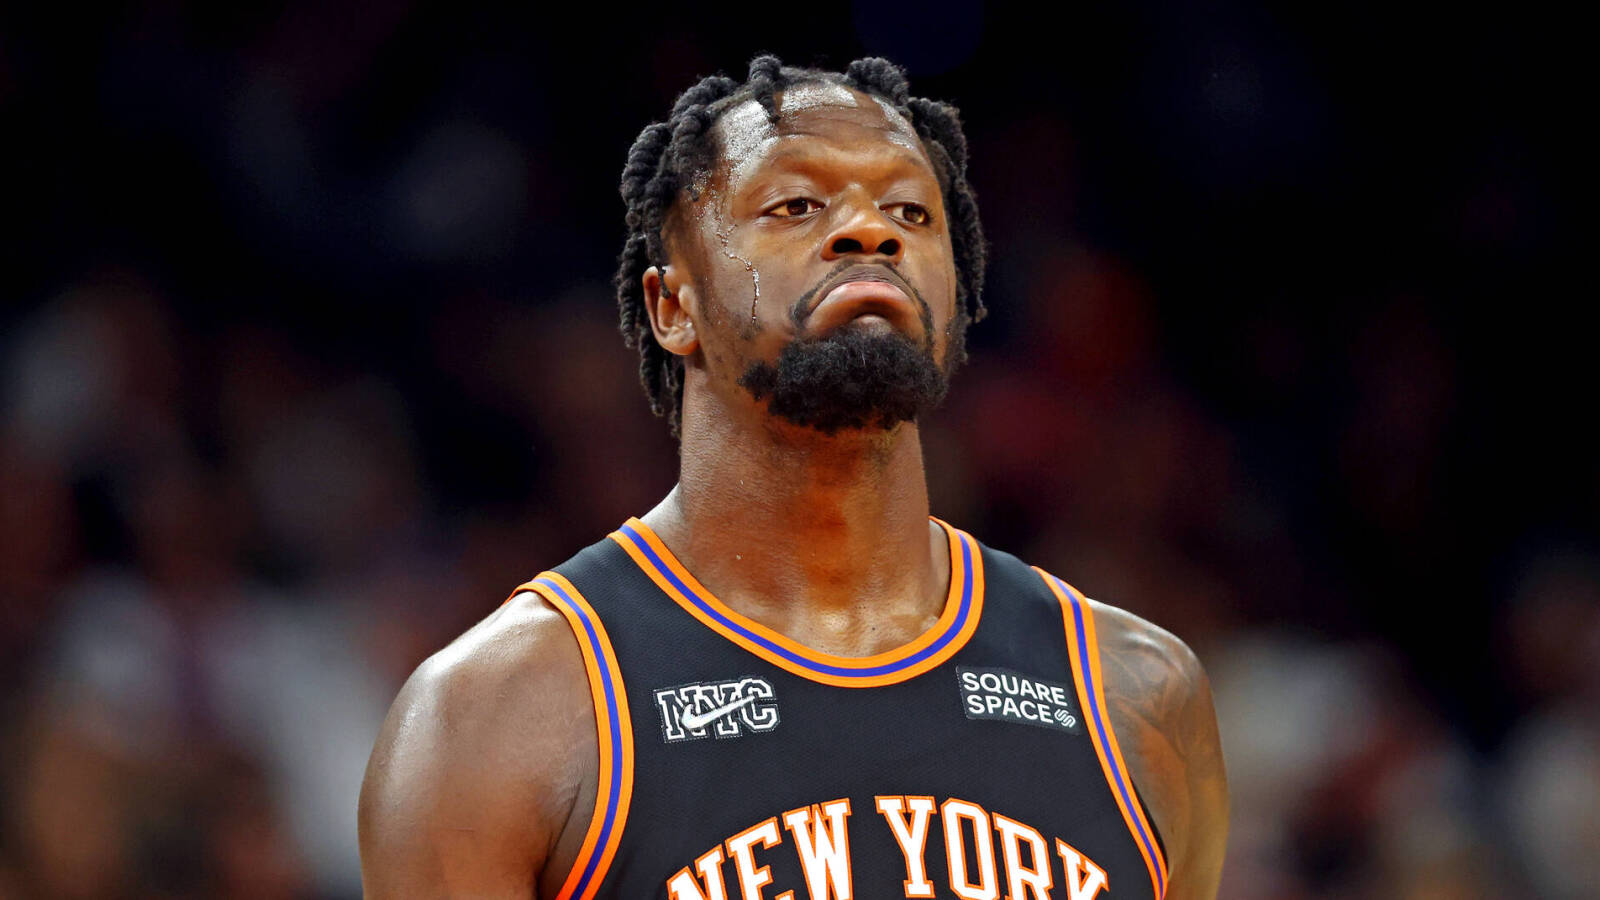 Julius Randle of Knicks was fined $50,000 following a confrontation with Cam Johnson of the Suns.